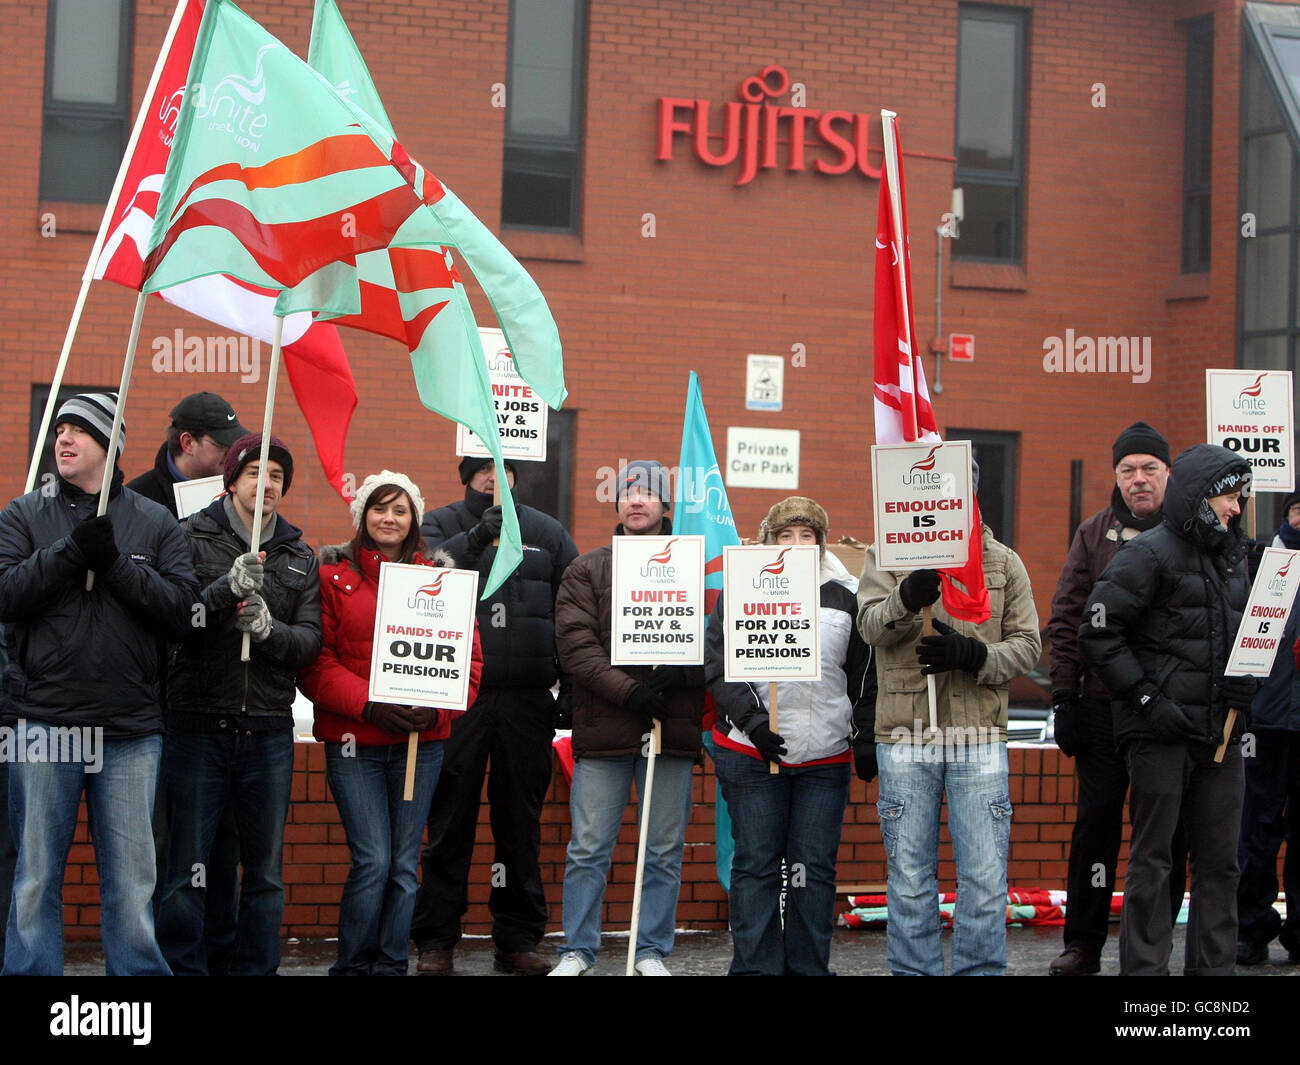 Workers stand outside the Fujitsu offices on the Holywood road in Belfast, where they are striking against proposals for redundancies, a pay freeze and plans by the company to close the main final salary pension scheme to new workers. Stock Photo